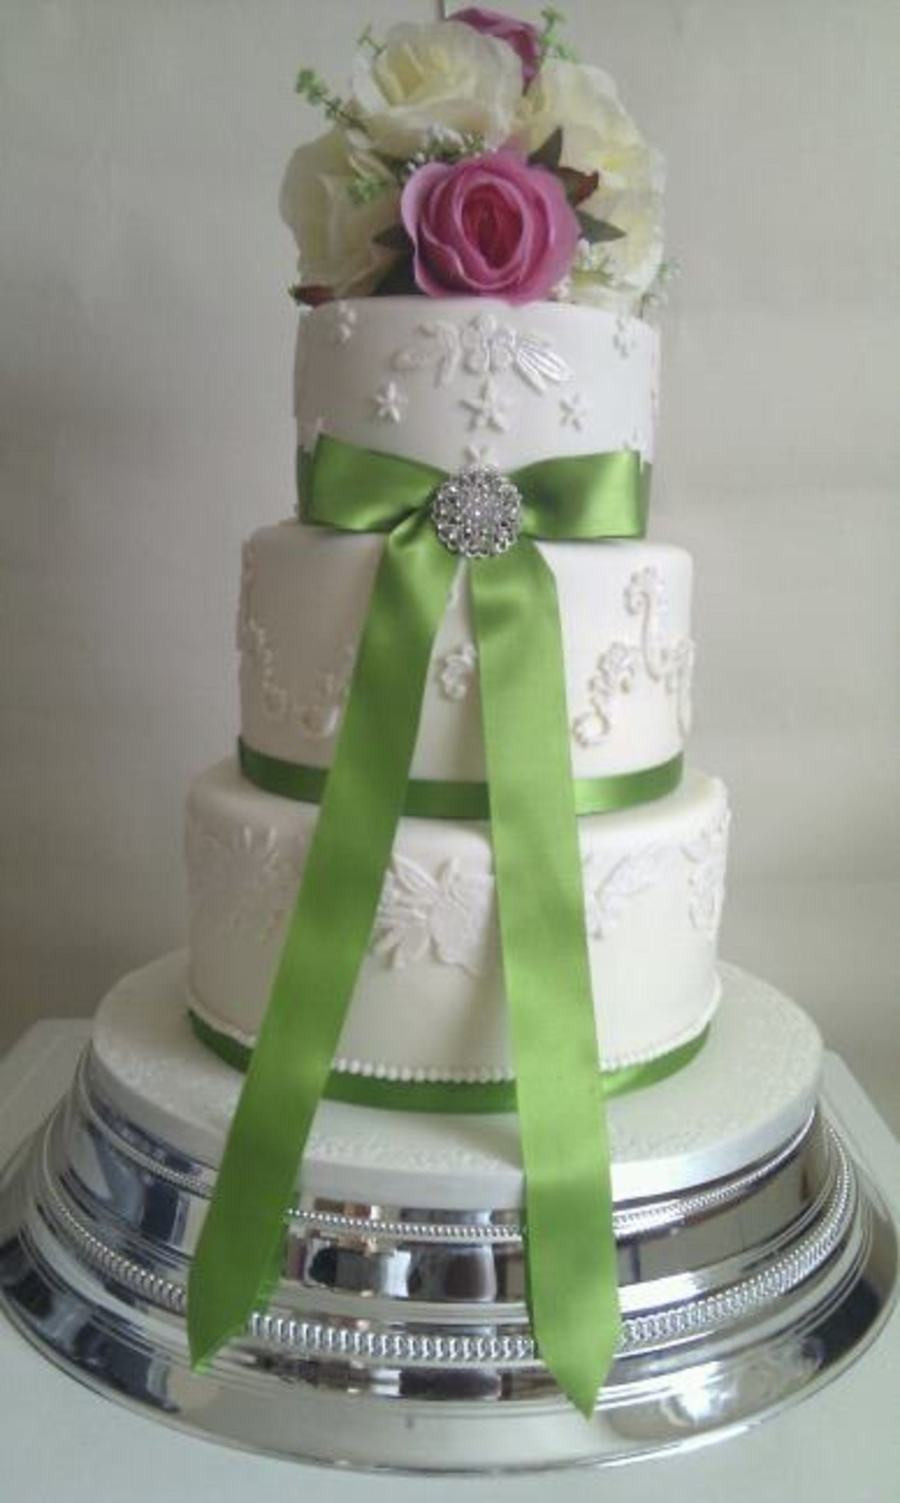 Pink And Green Wedding Cakes
 Lime Green And Pink Wedding Cake CakeCentral